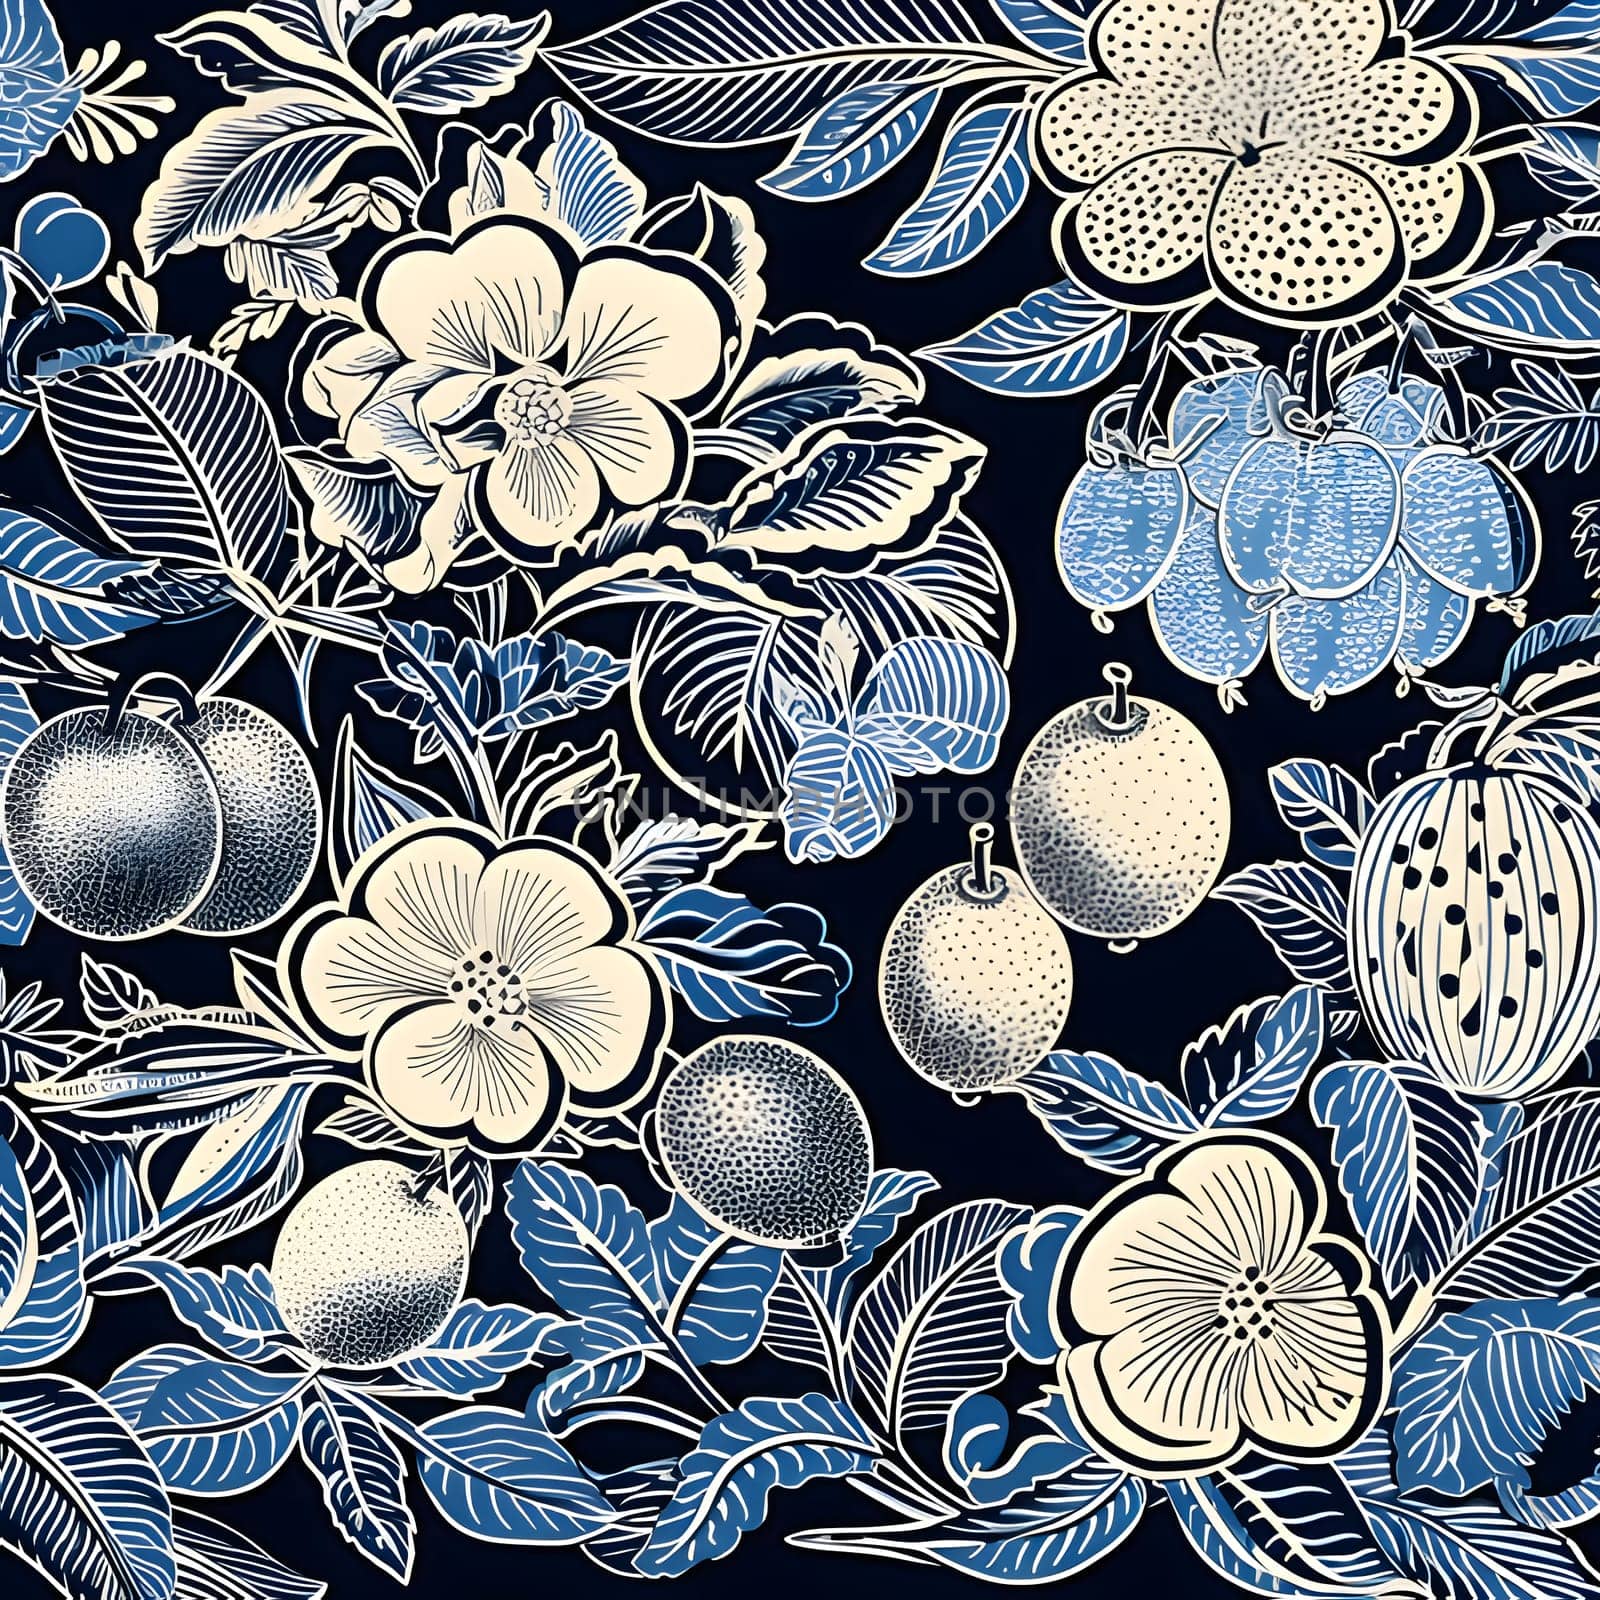 Patterns and banners backgrounds: Seamless pattern with hand drawn flowers and fruits. Vector illustration.